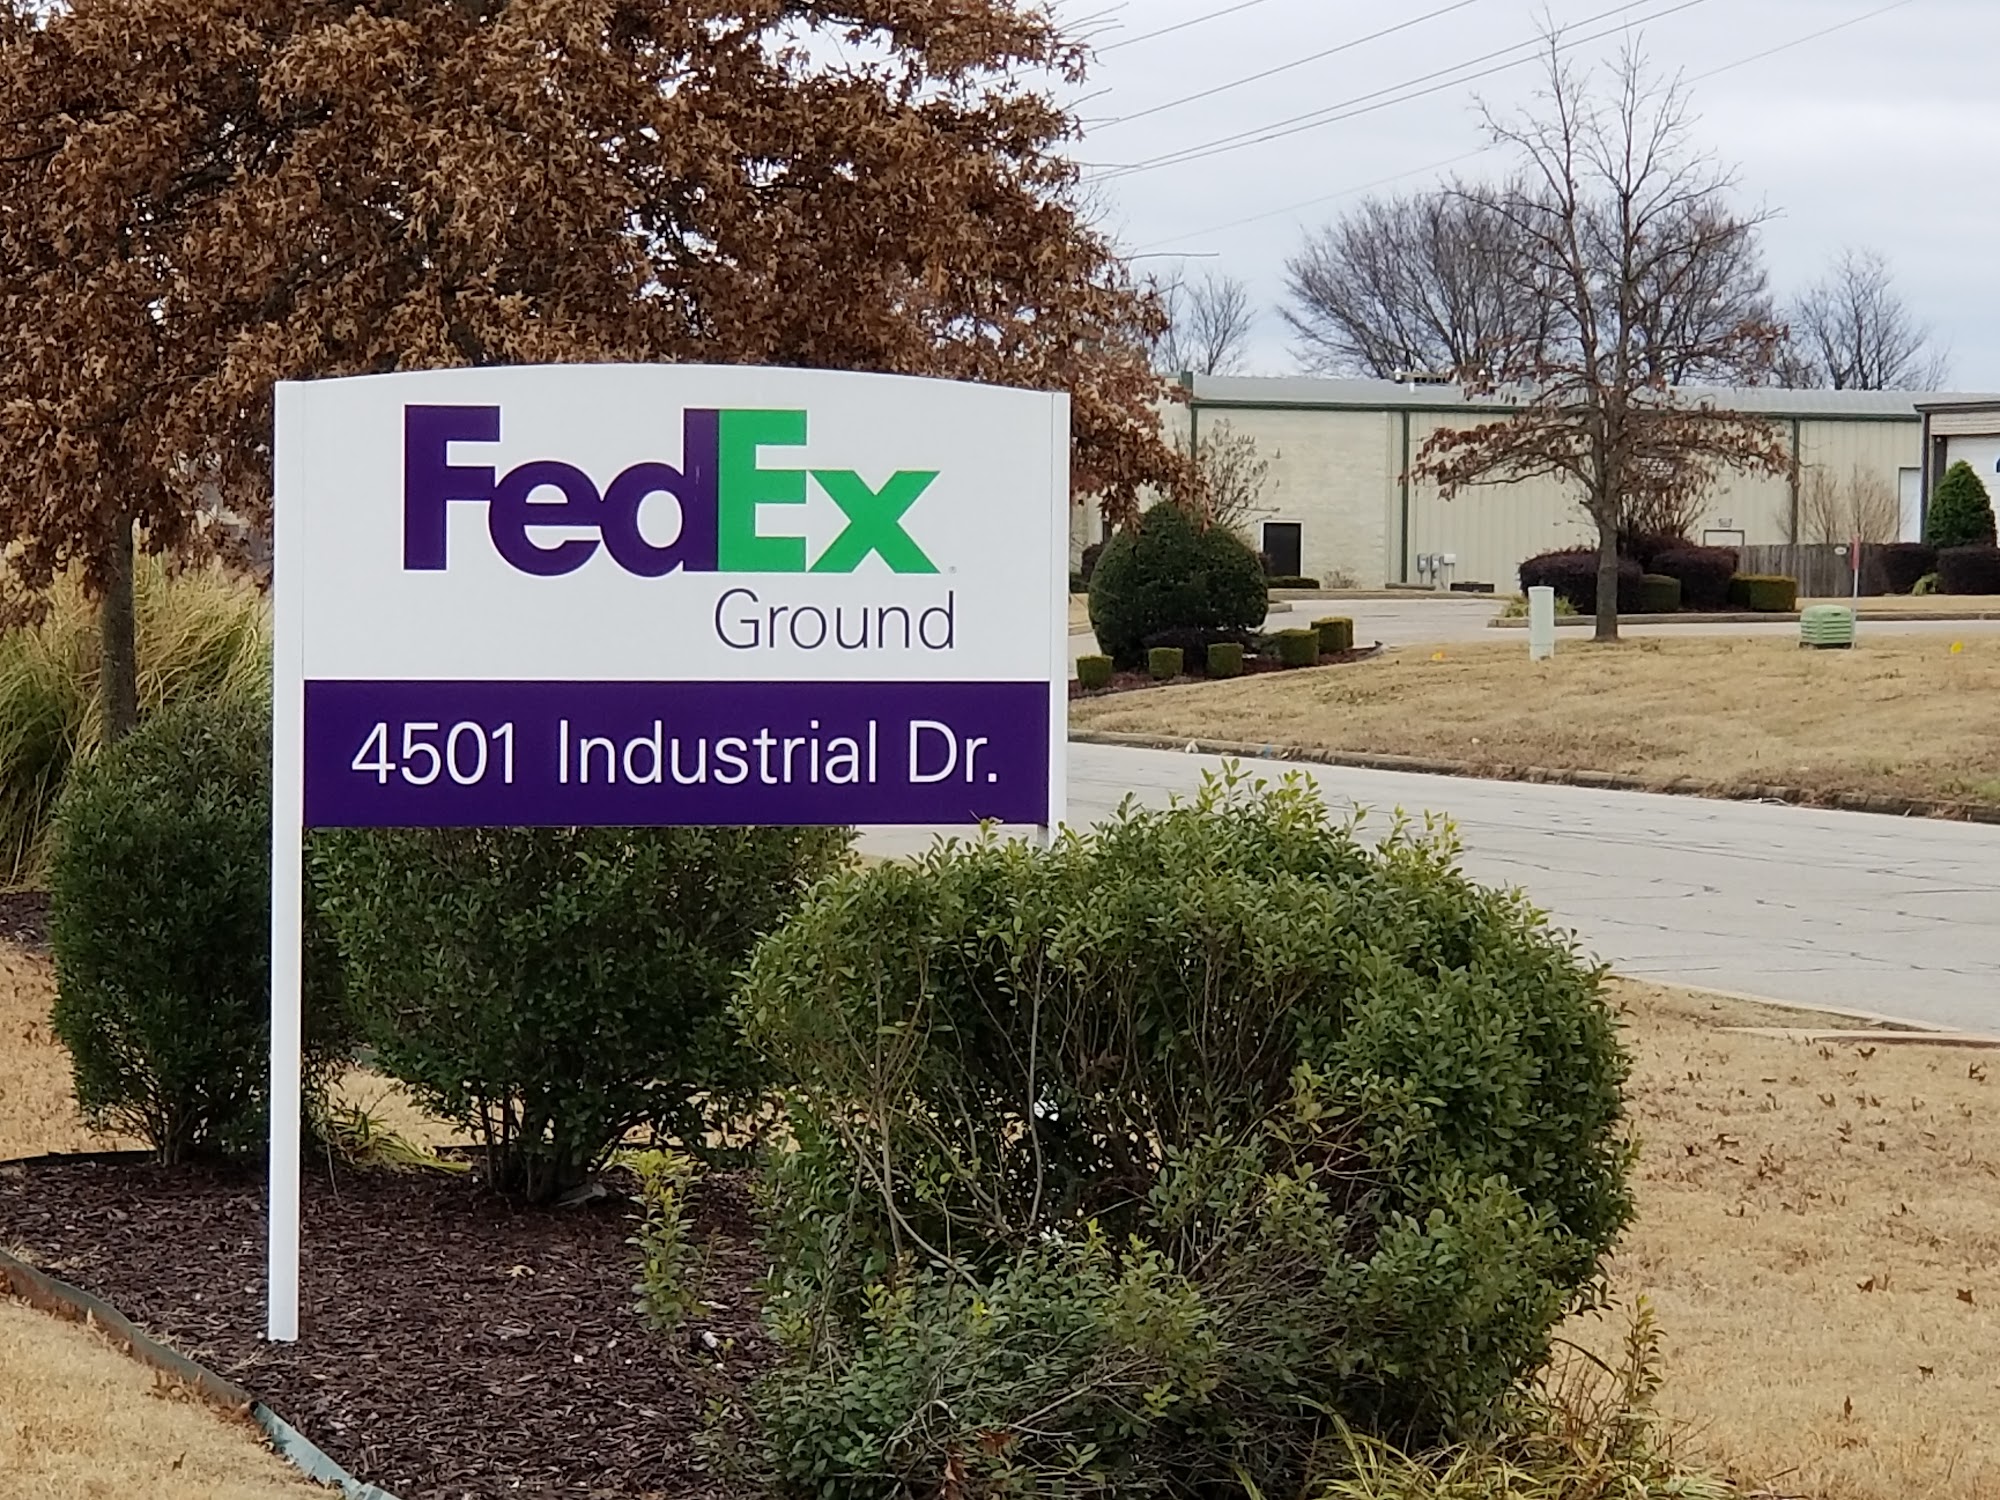 FEDEX GROUND - 4501 Industrial Dr, Fort Smith AR - Hours, Directions ...